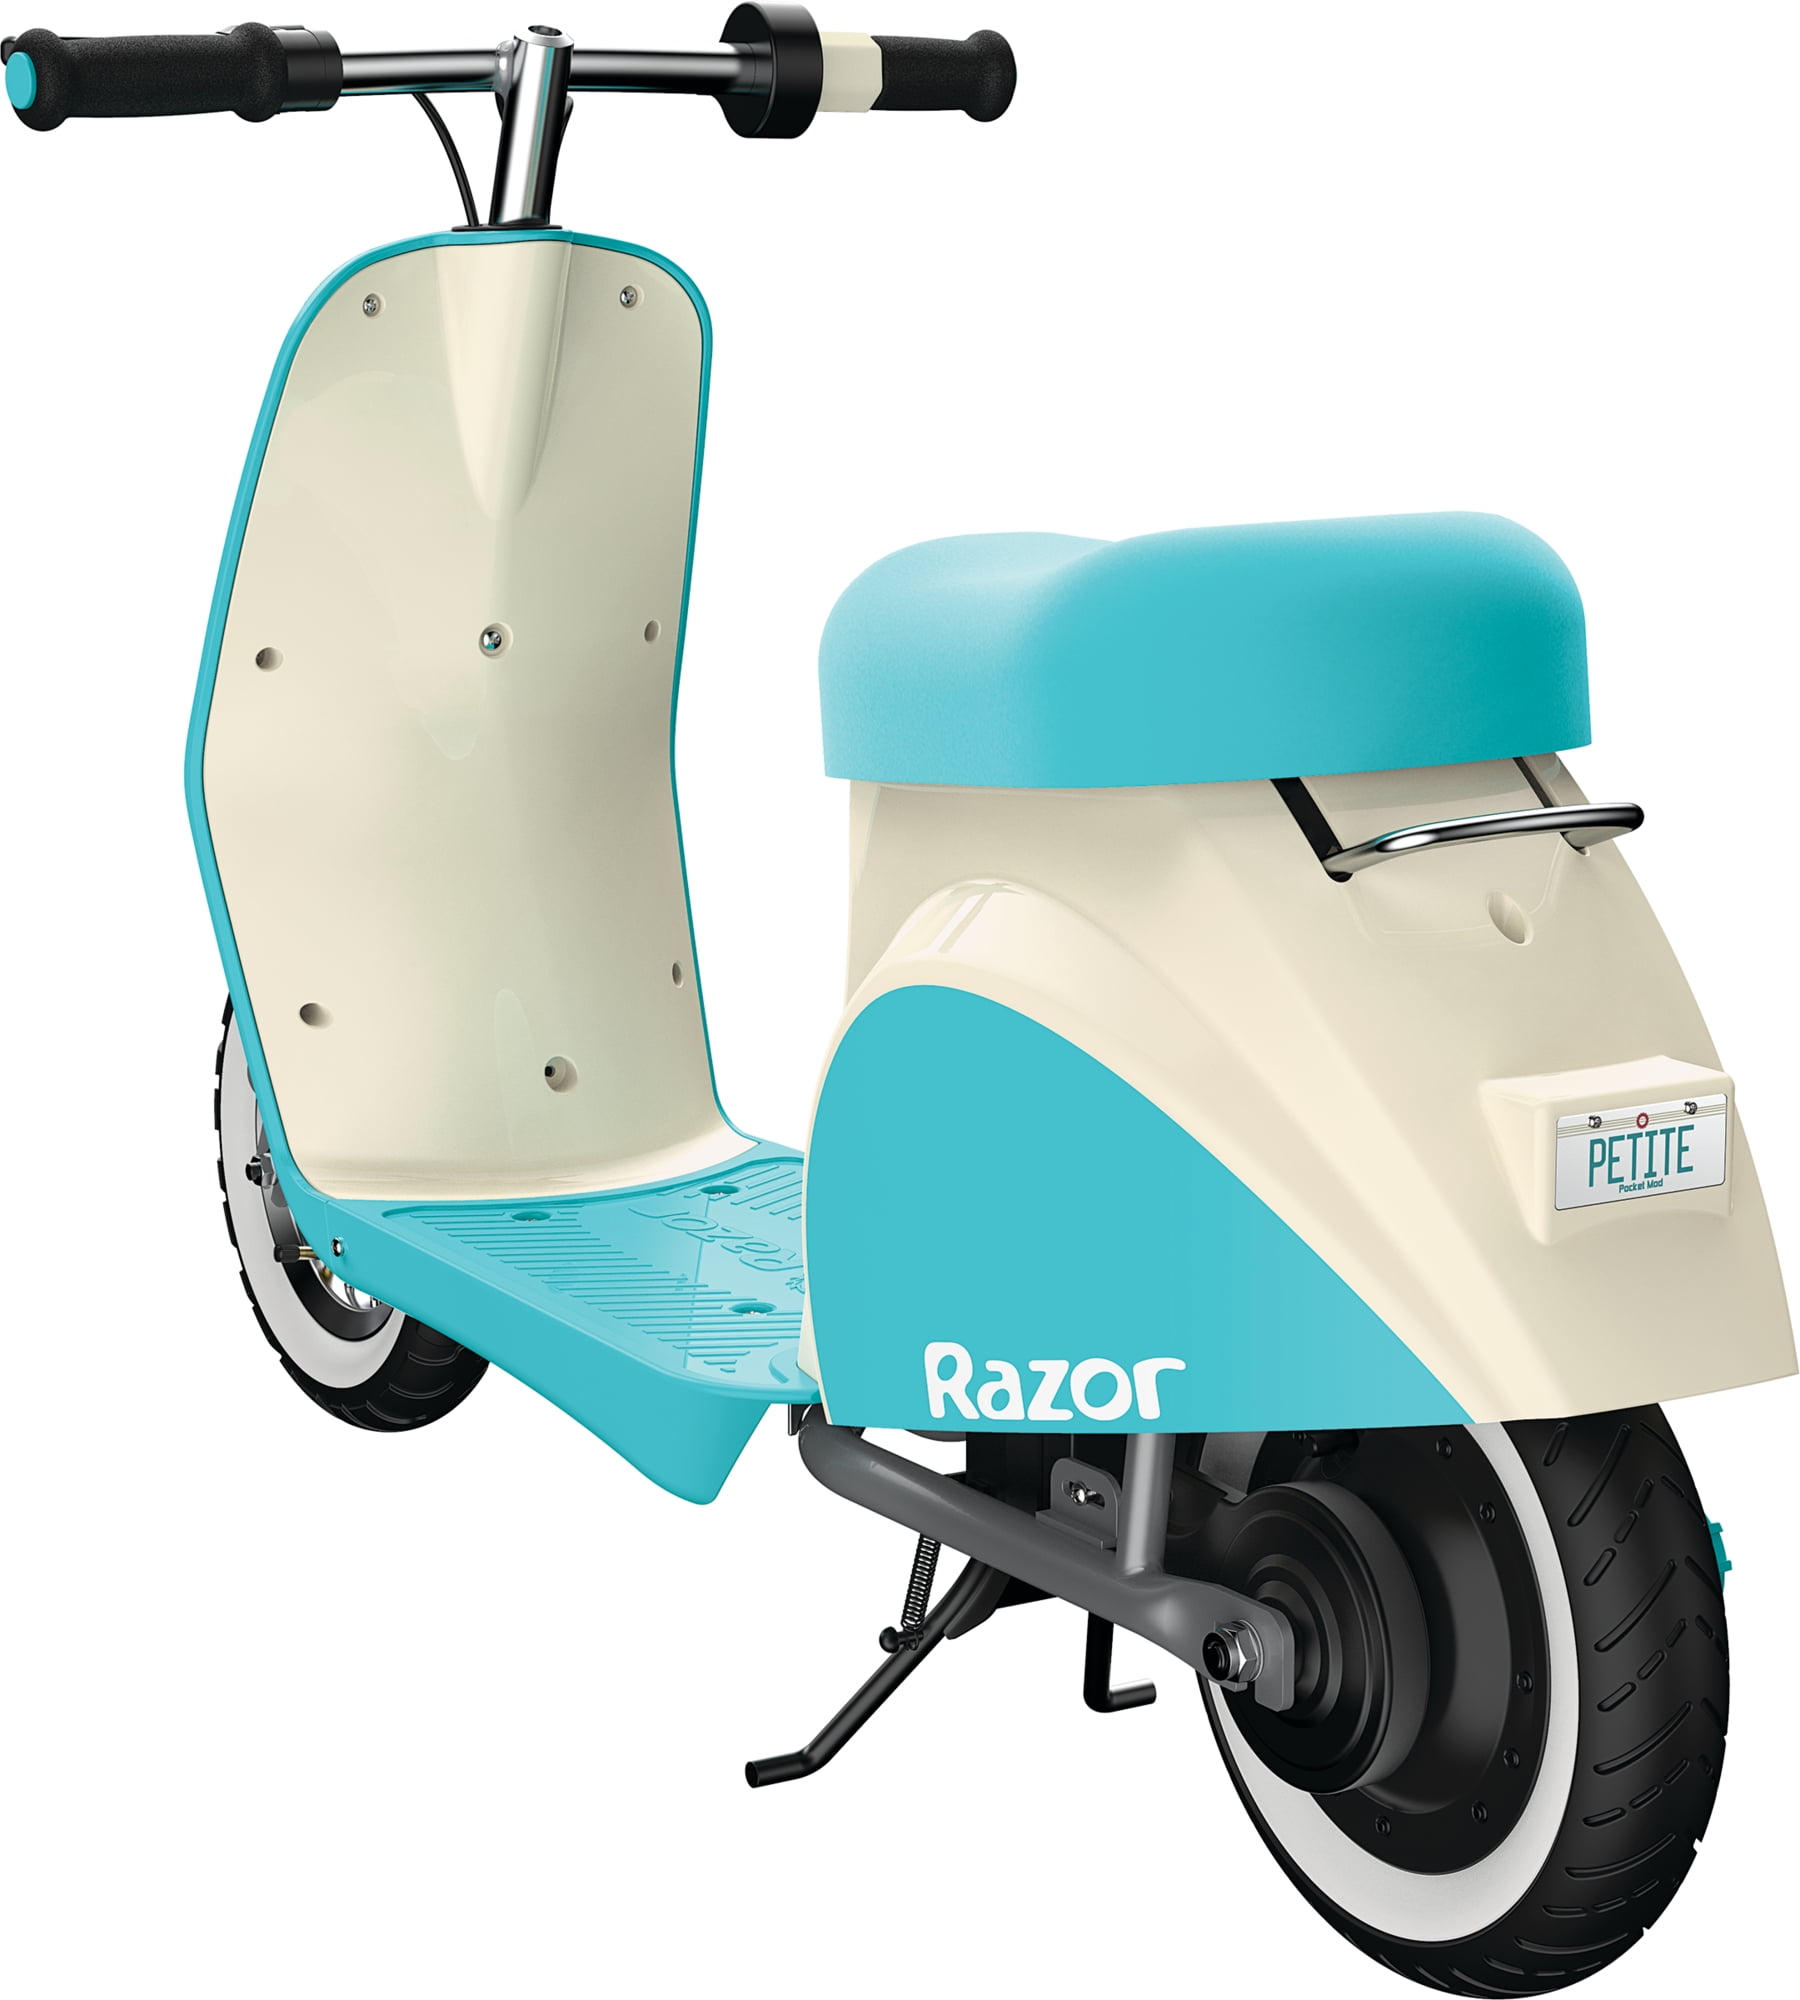 Razor Pocket Mod Petite - 12V Miniature Euro-Style Scooter for Girls Ages 7+, Hub-Driven Motor, White Wall Tires, Up to 40 min Ride Time - Walmart.com